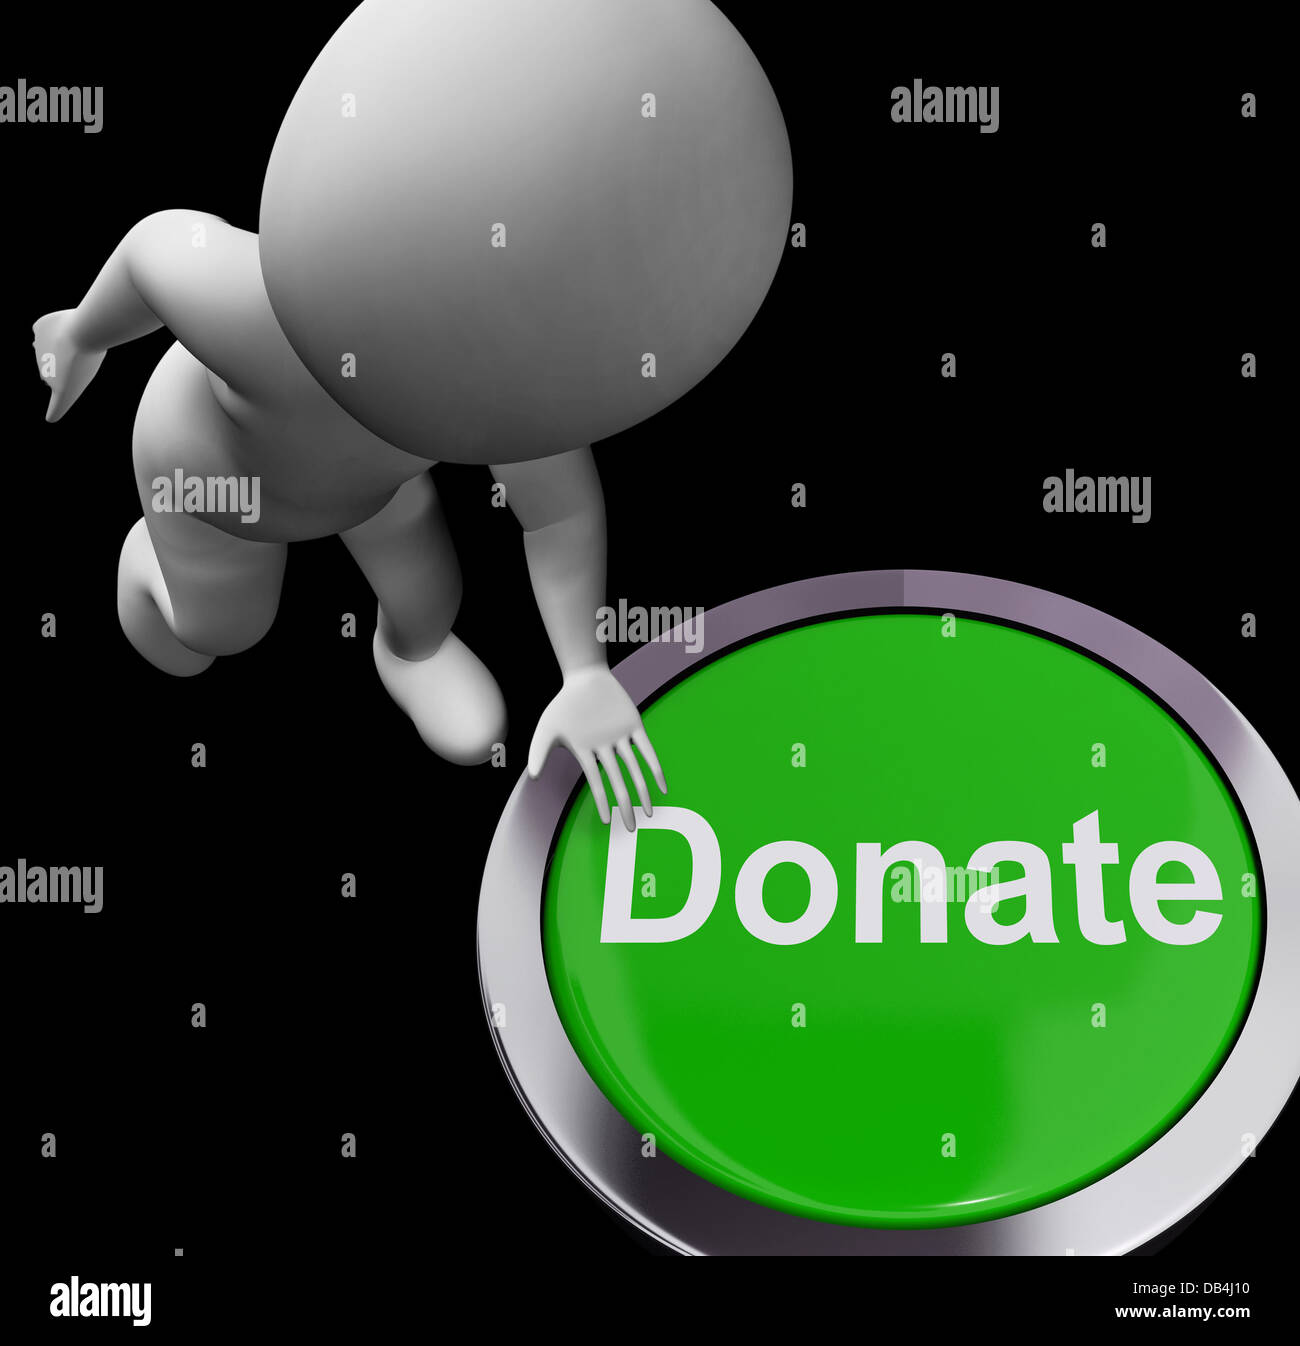 Donate Button Shows Charity Donations And Fundraising Stock Photo